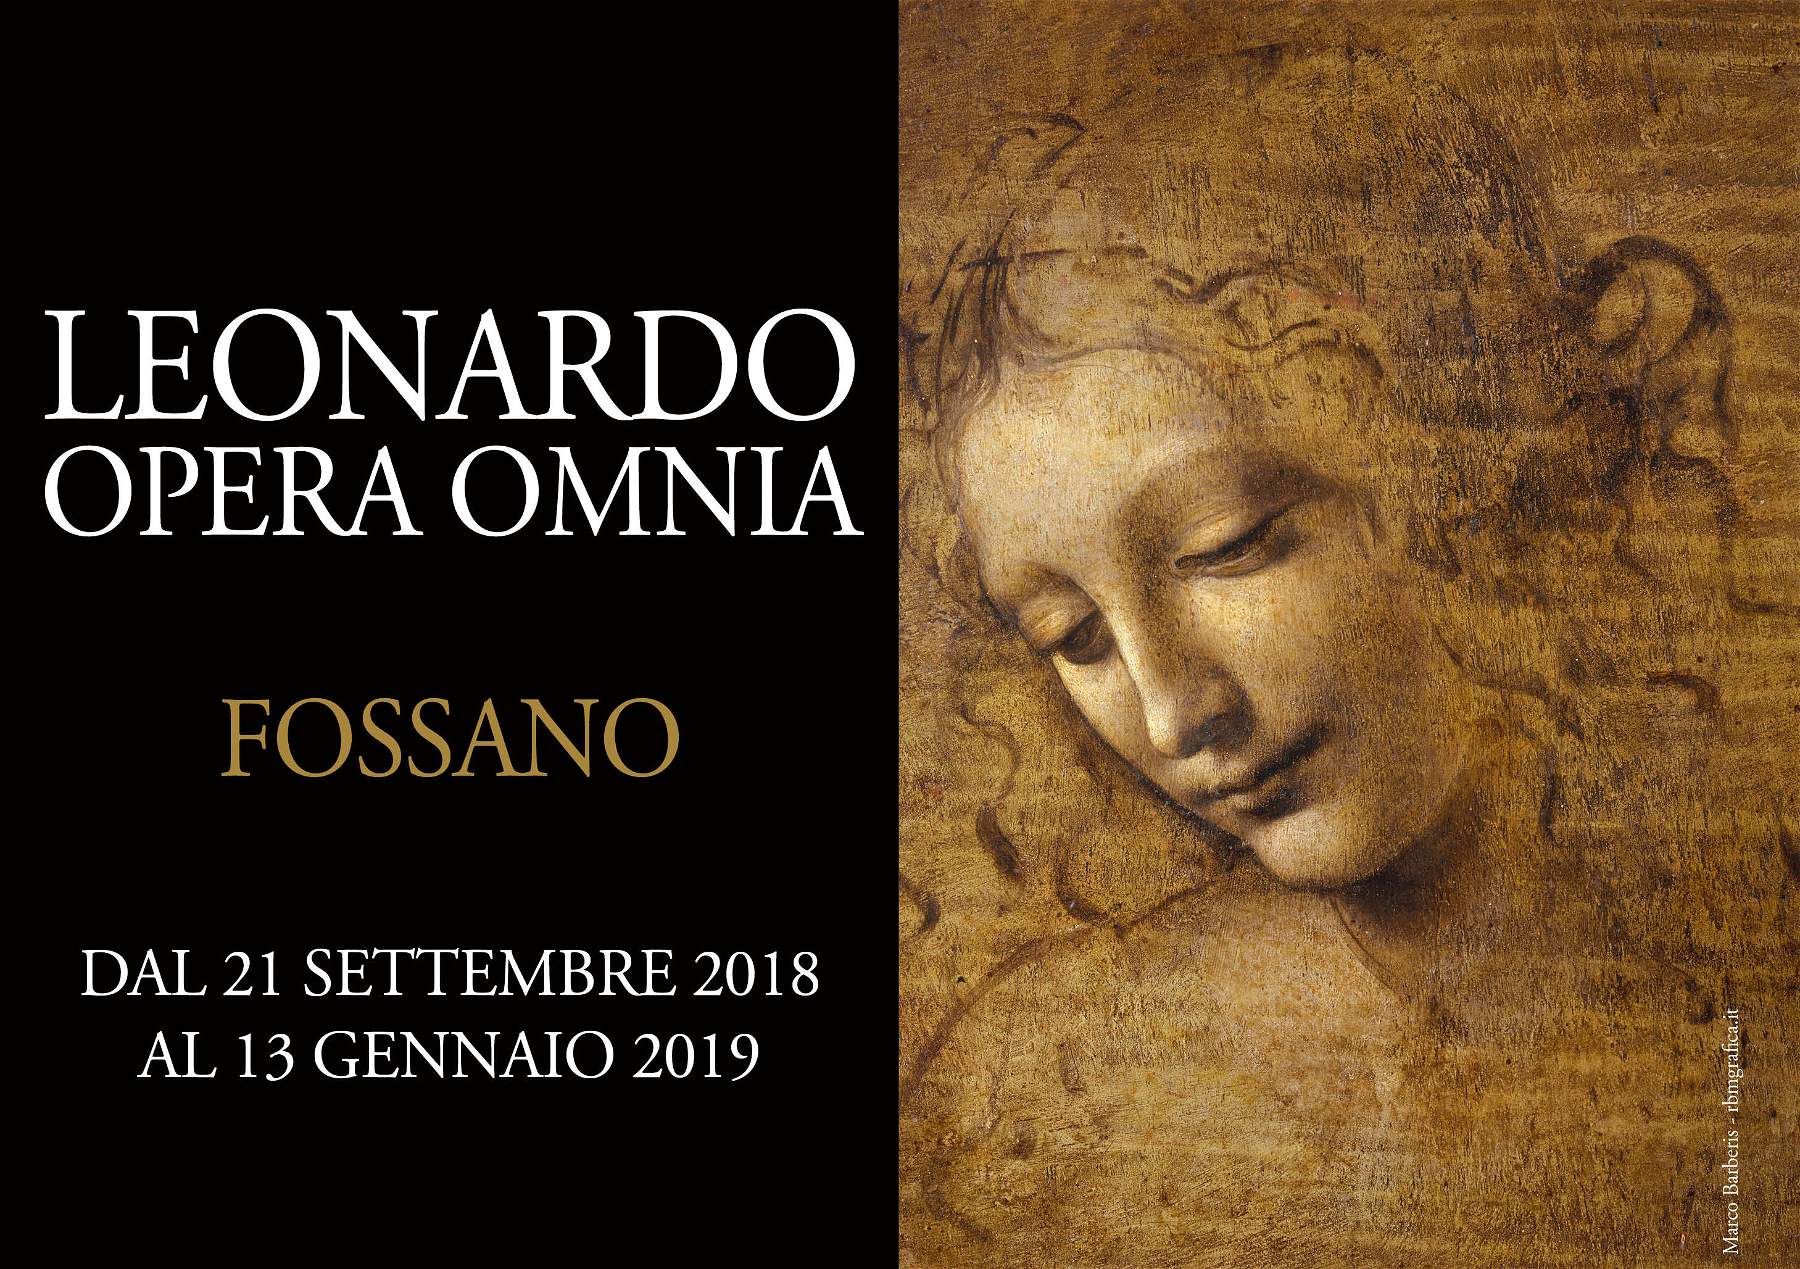 Fossano, an exhibition of reproductions of works by Leonardo da Vinci opens, curated by Antonio Paolucci